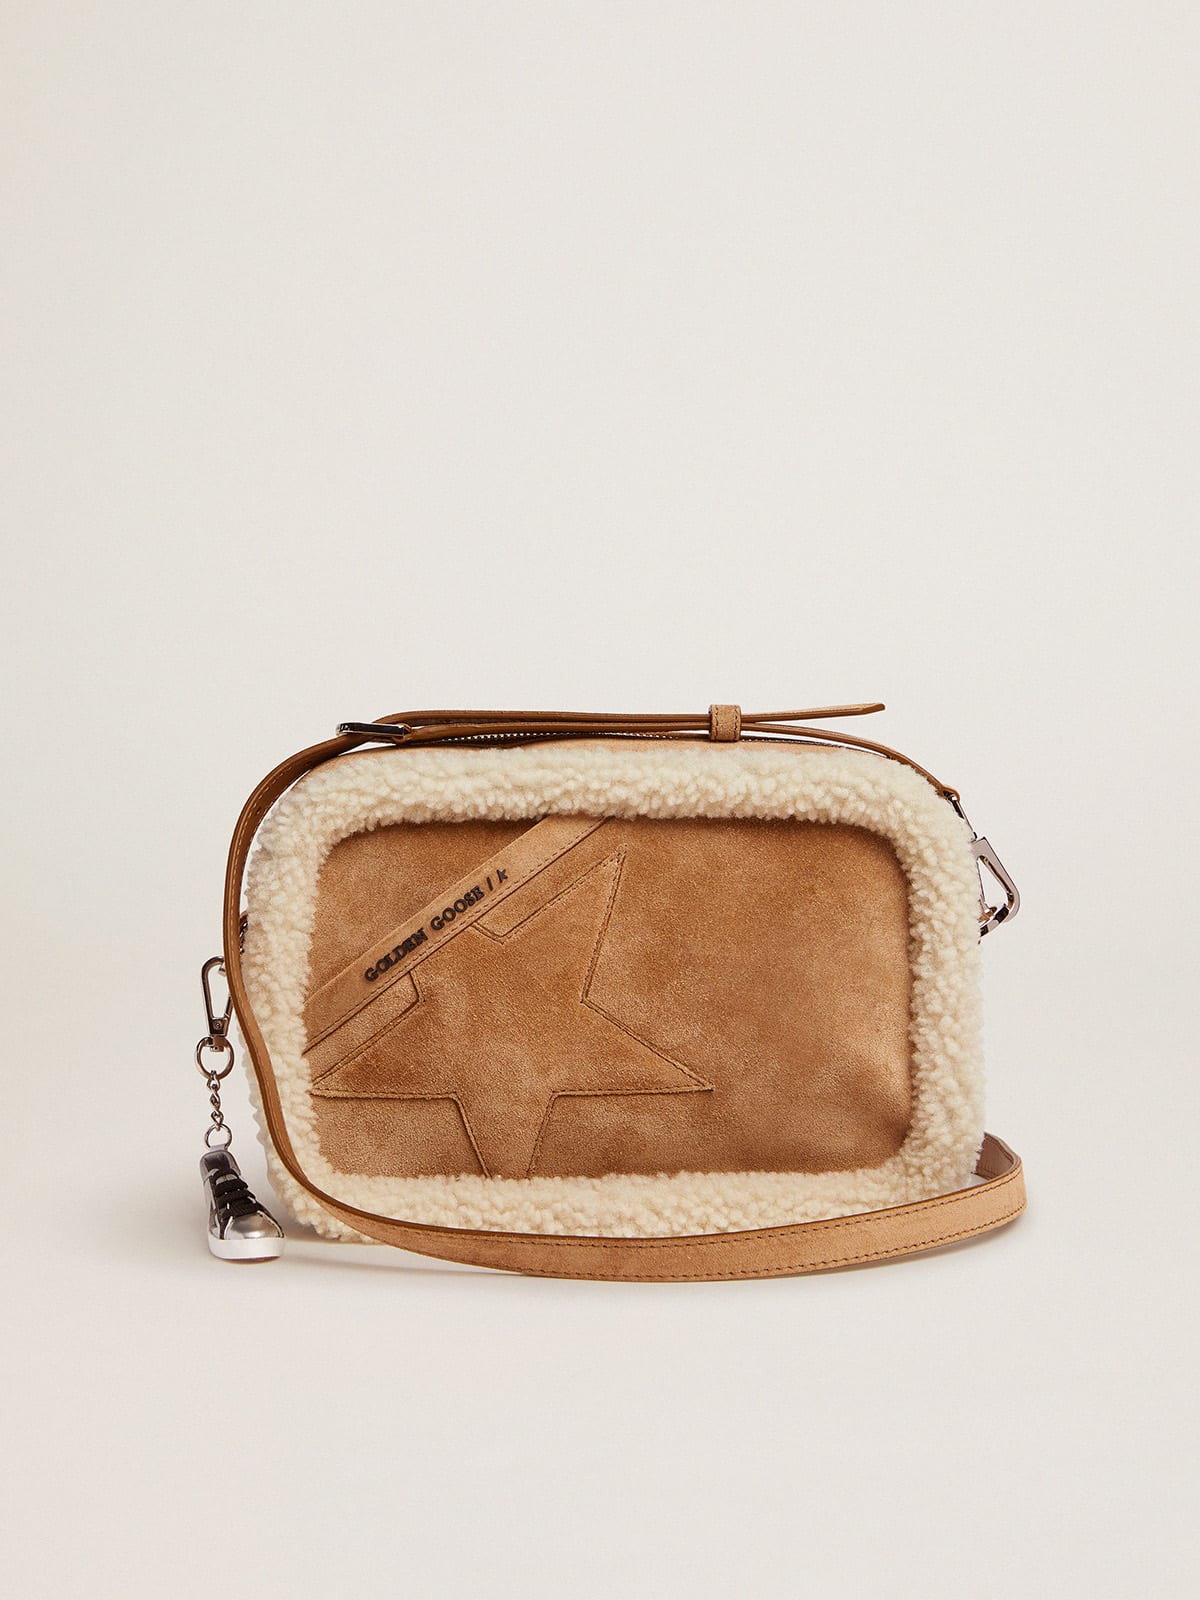 Star Bag made of suede leather with shearling edging